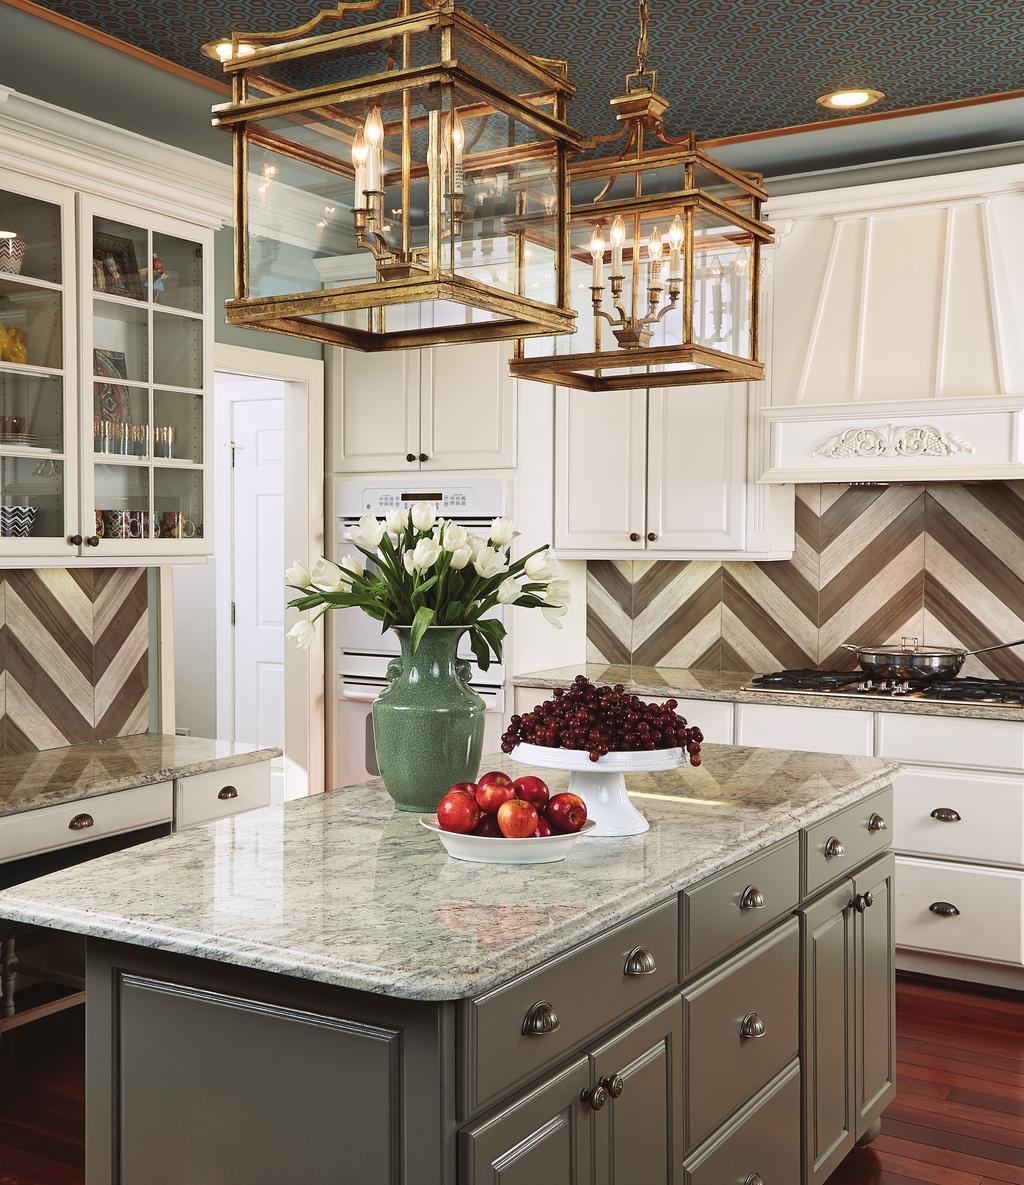 The kitchen s cabinetry and countertops were retained, but the chevron backsplash (which echoes the pattern of the flame-stitch fabric in the great room) was added, as was the ceiling